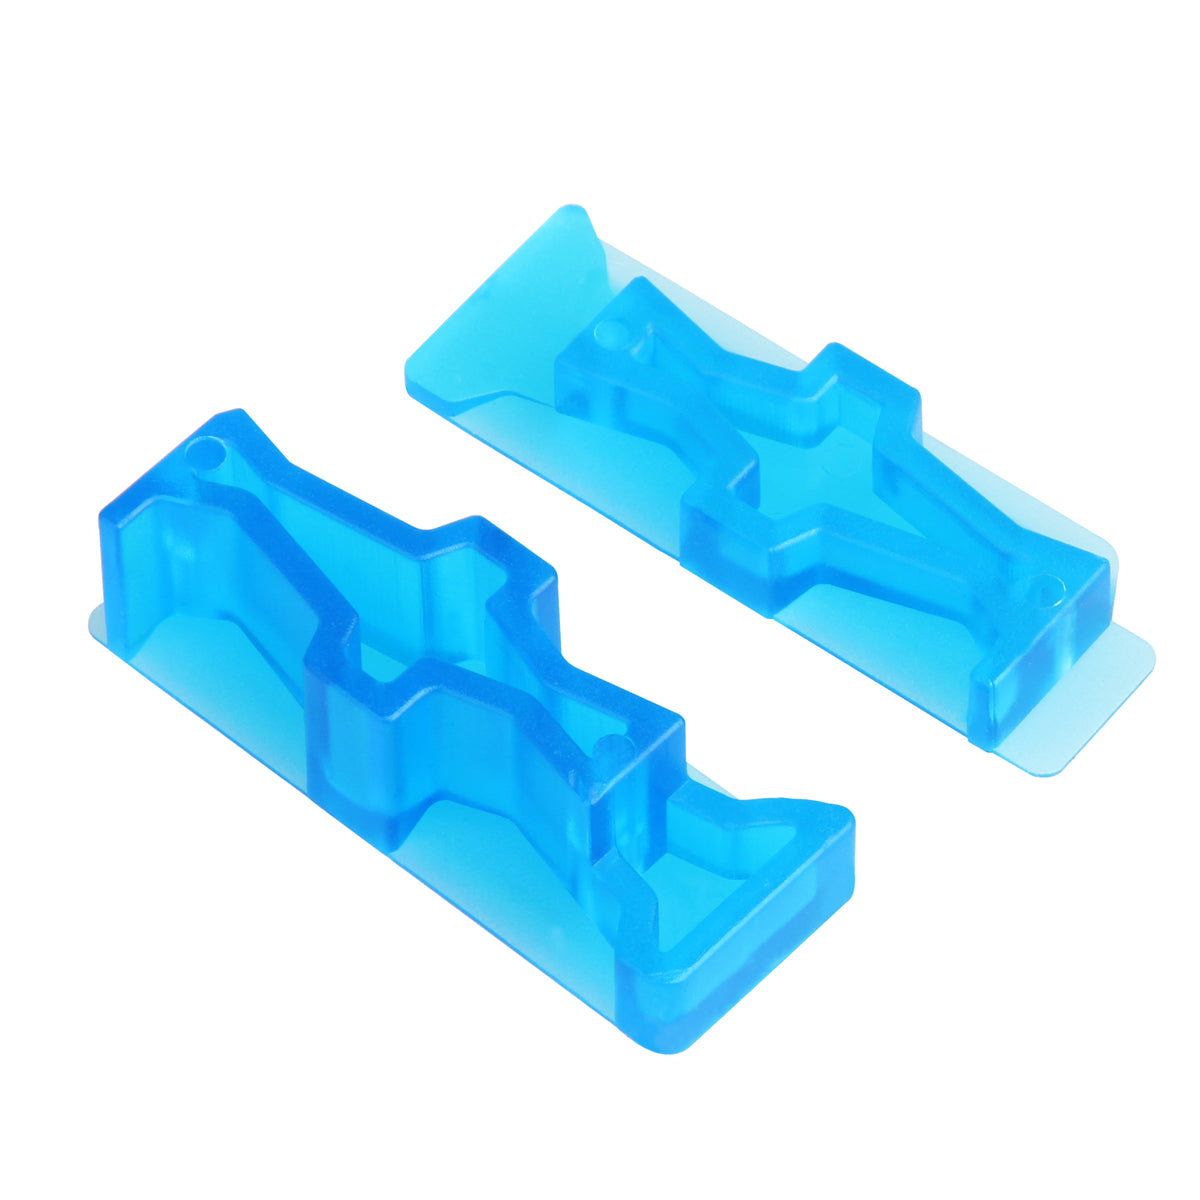 Worker Mod Top and Side Rail Adapter Picatinny Base Set for Nerf Stryfe and Worker Mod Swordfish Blaster Toy Color Blue Transparent - BlasterMOD